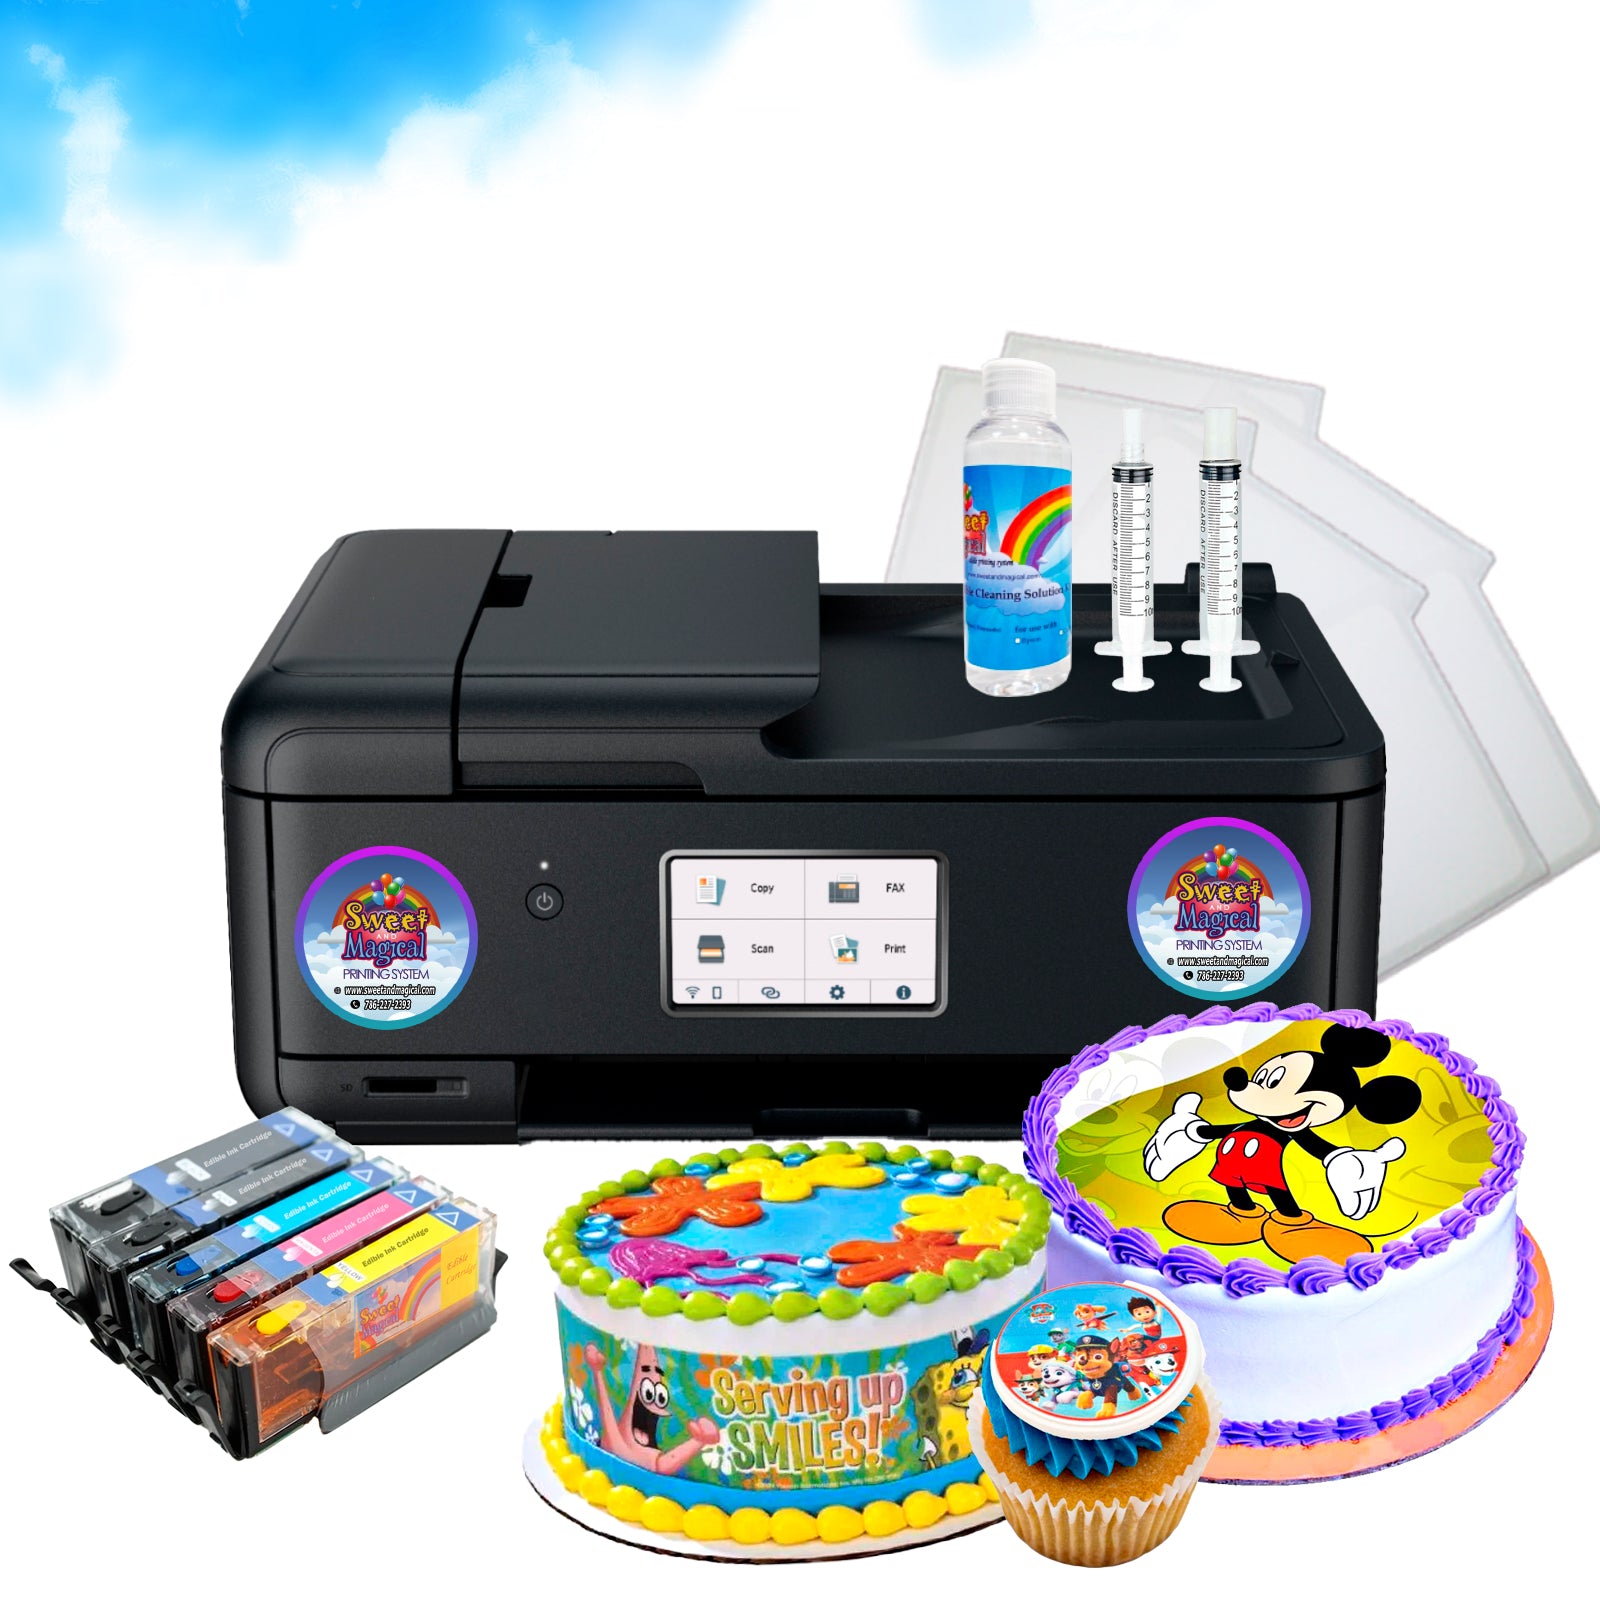 Edible Image Cake Printers, Edible Ink and Icing Sheets, Frosting Sheets